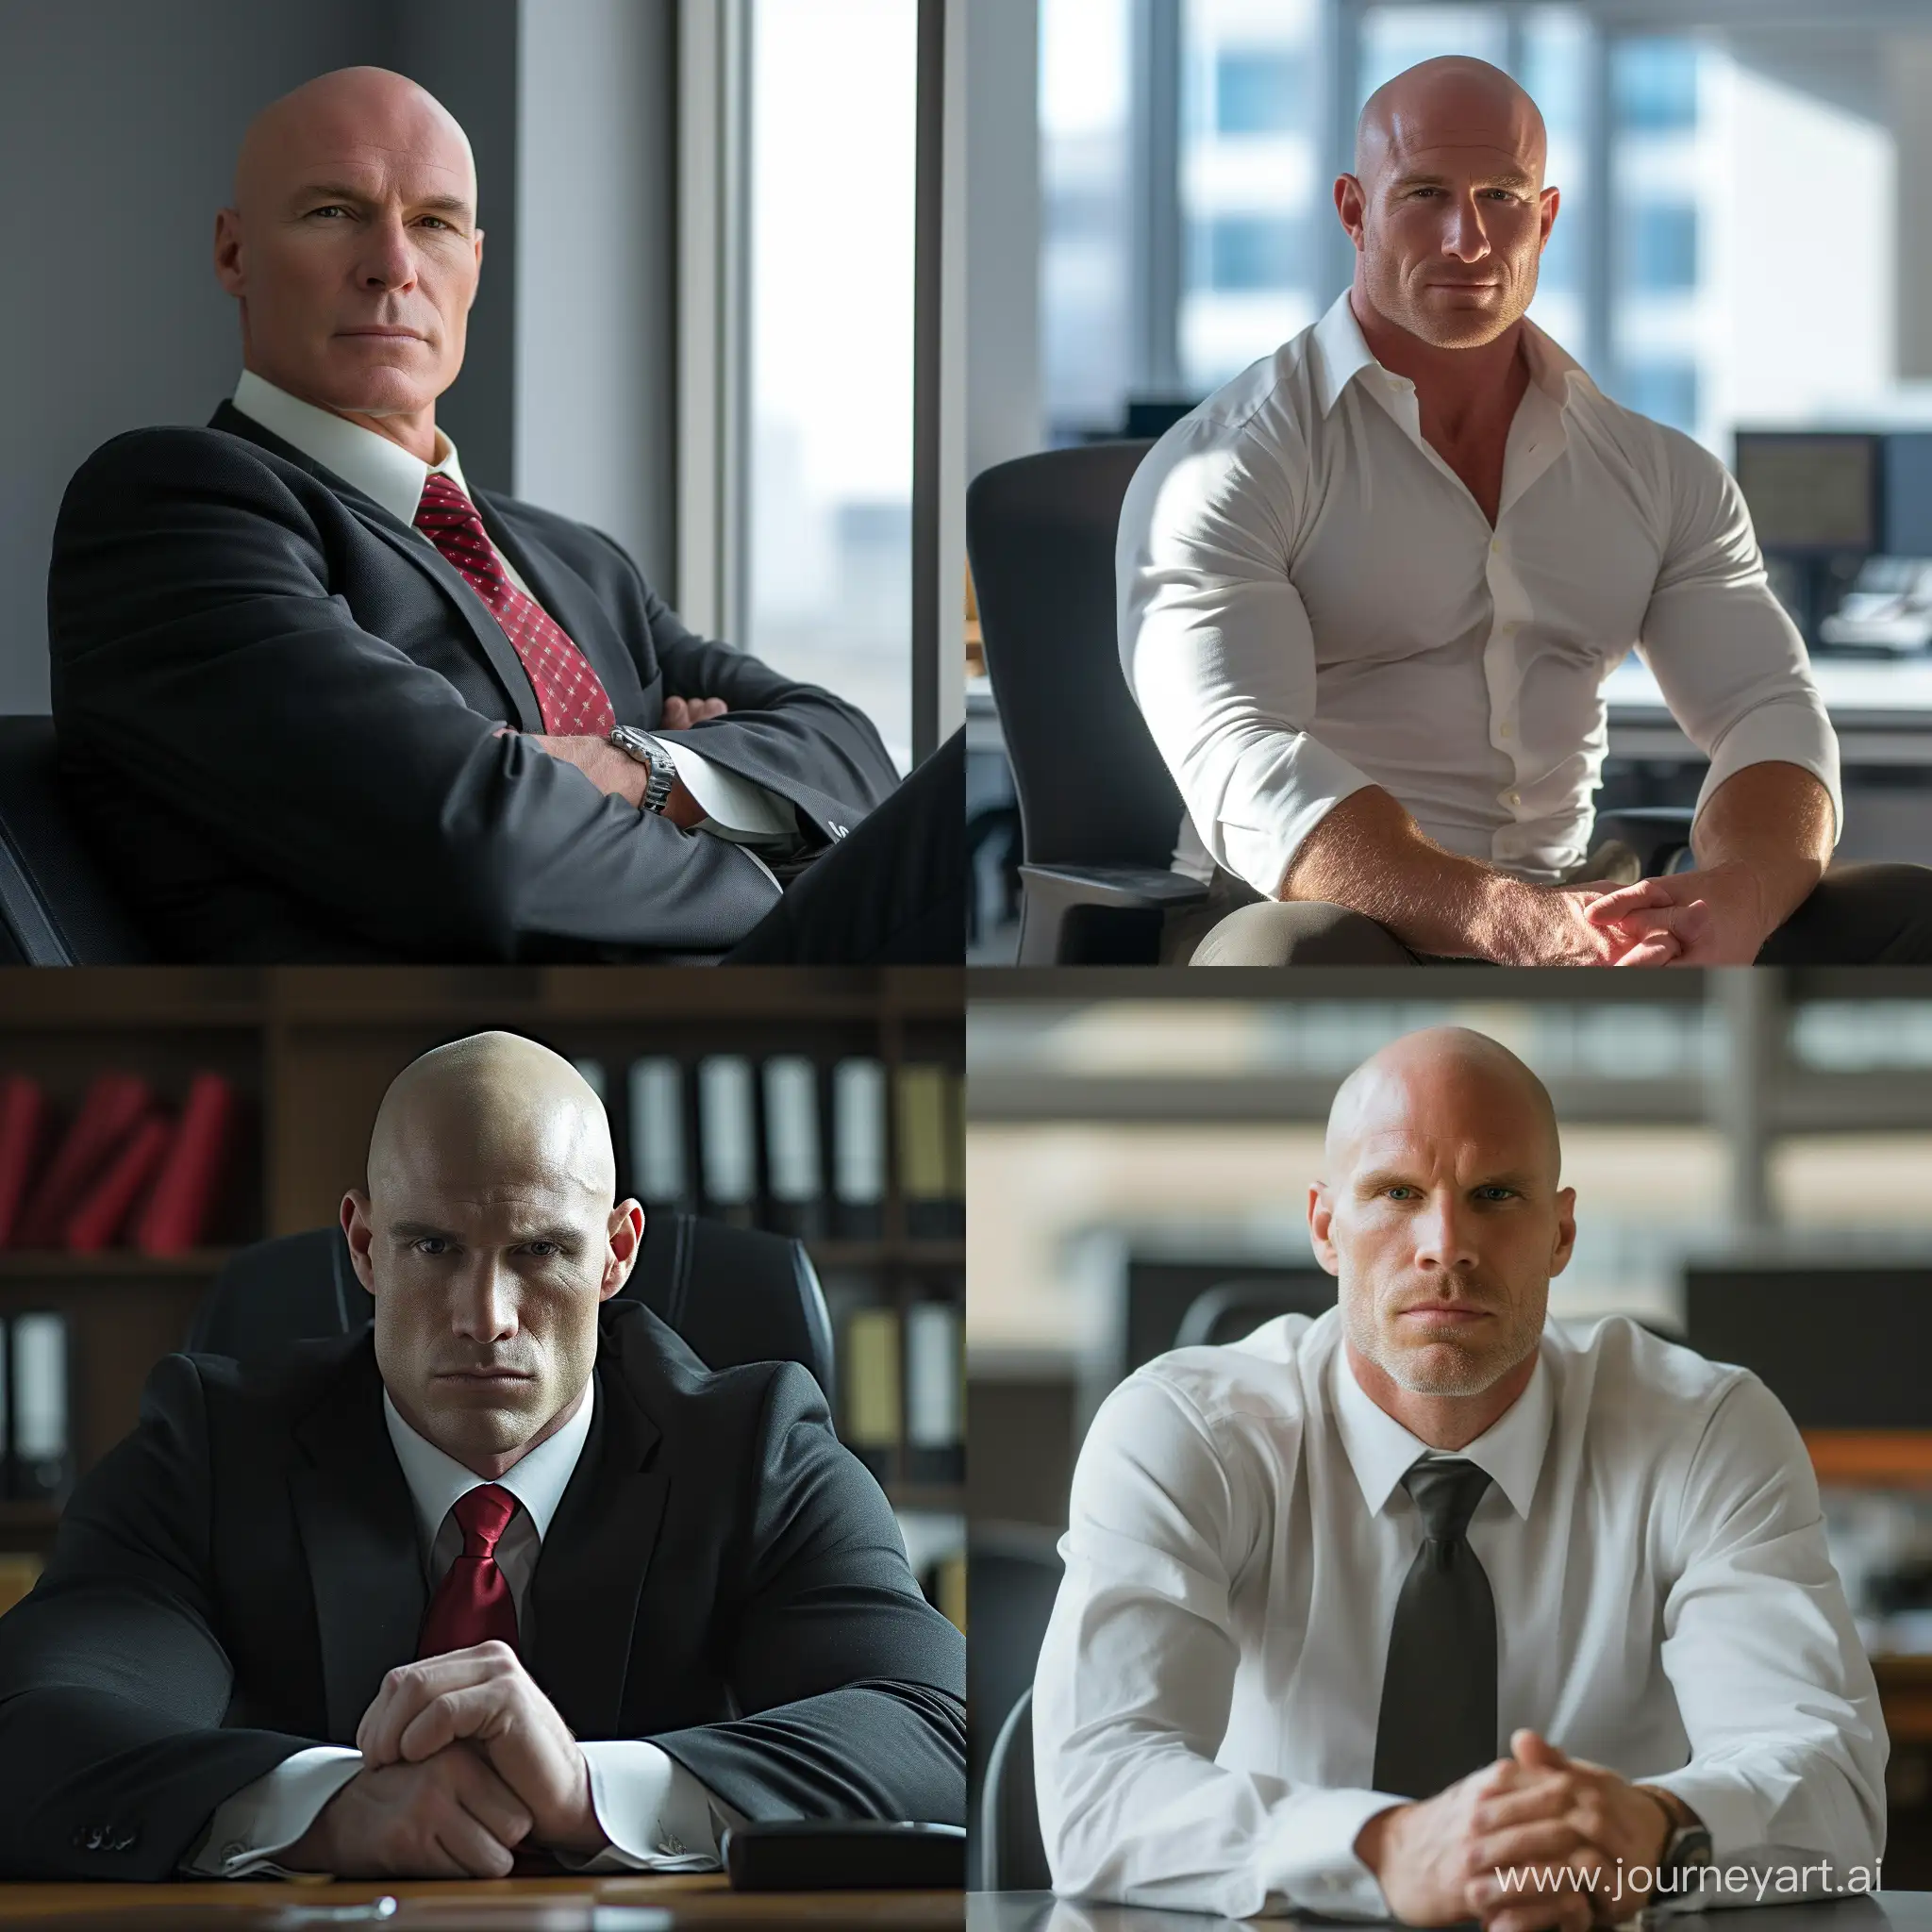 /imagine a white bald muscular businessman in his 50s at the office, sitting, full body